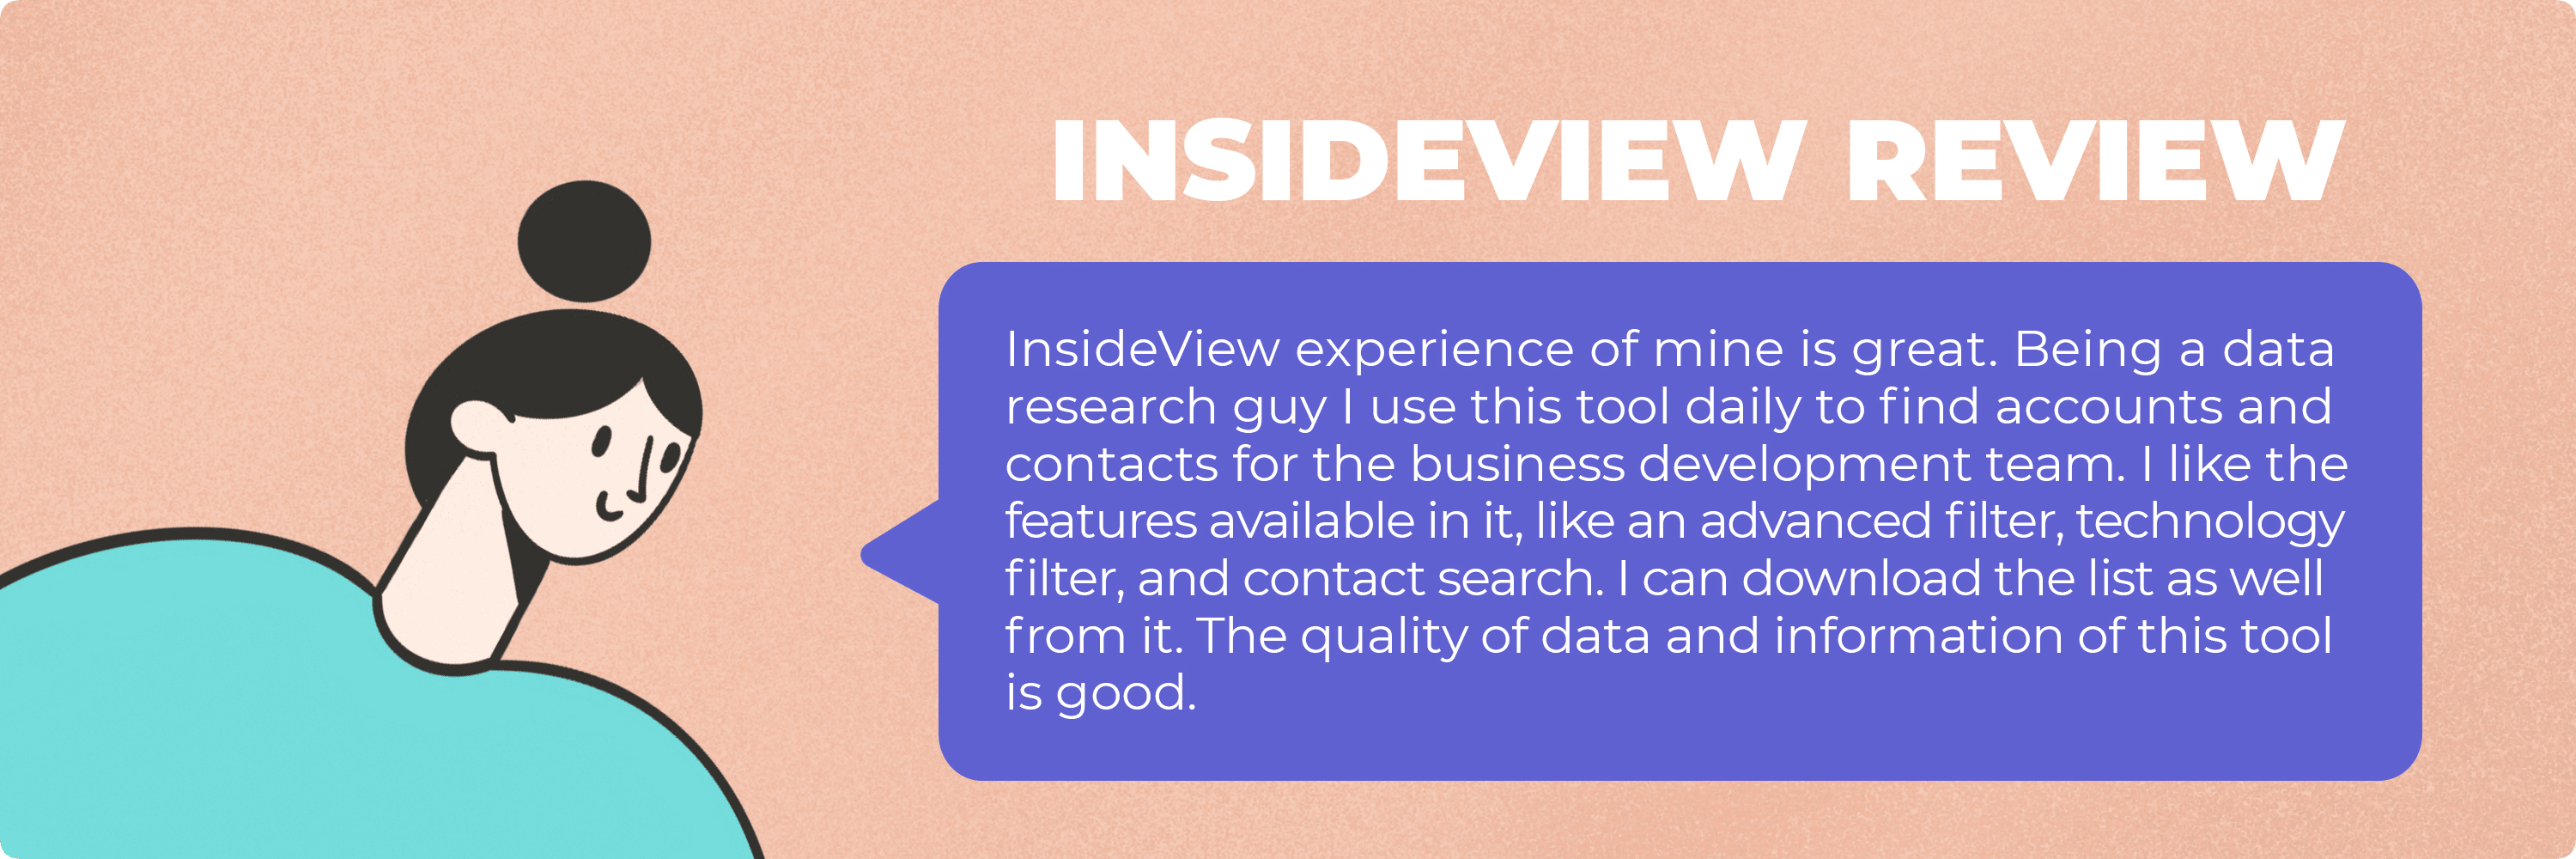 insideview review